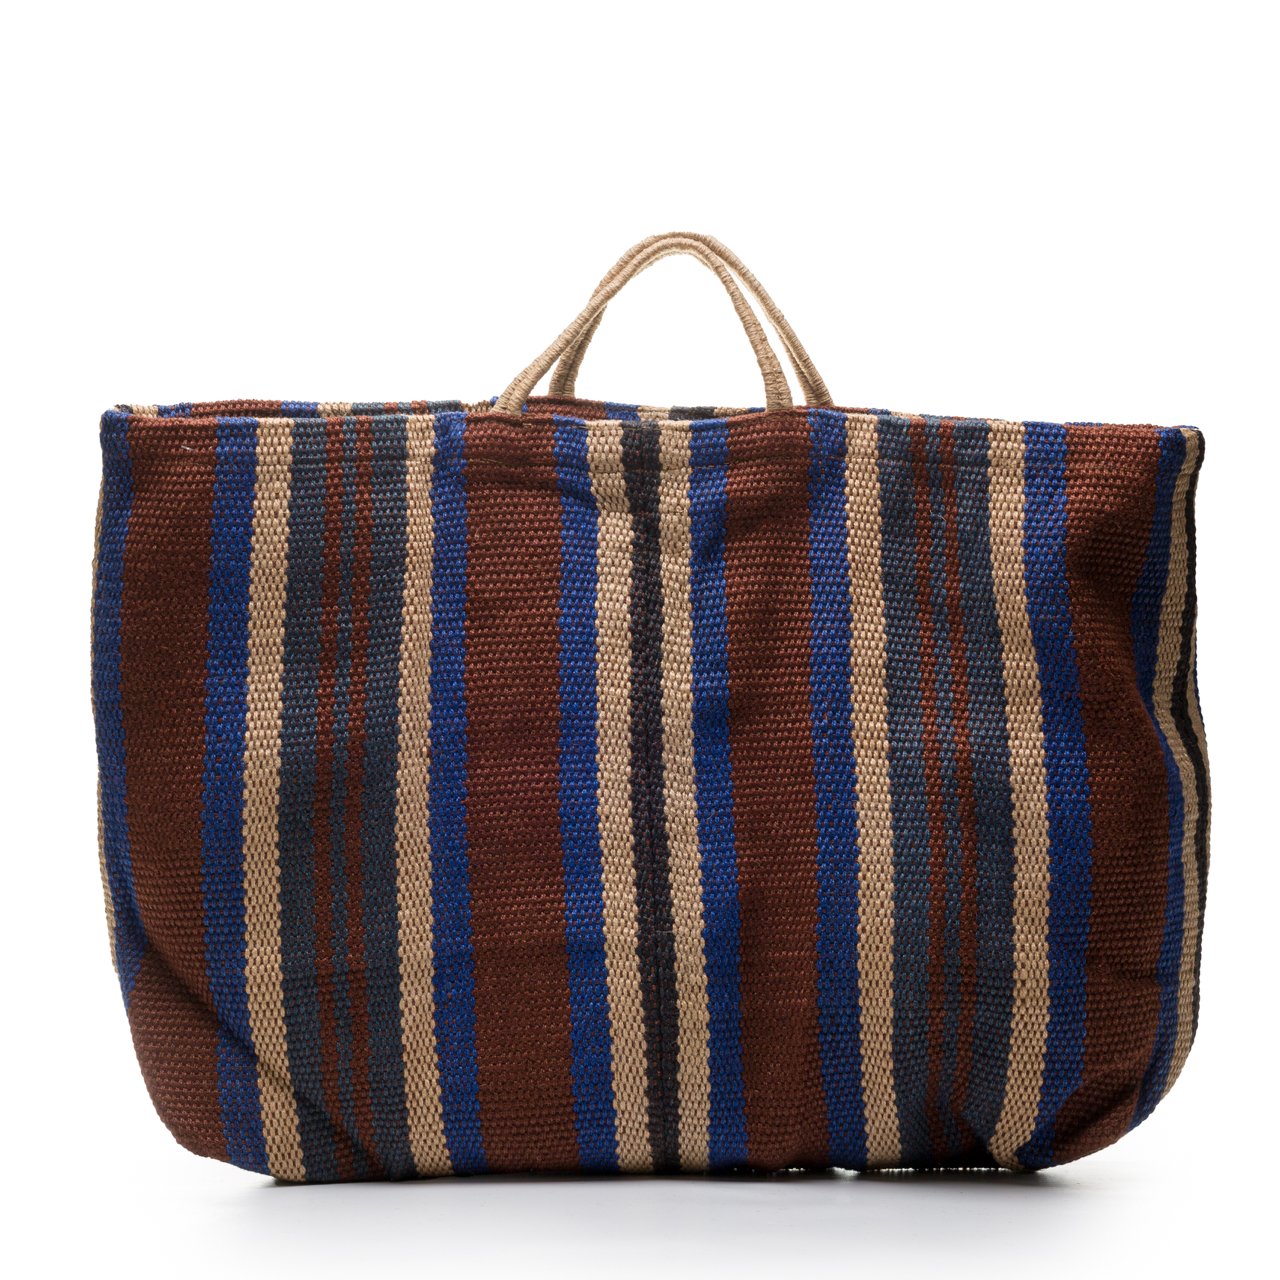 EXTRA LARGE JUTE BAG BROWN AND BLUE STRIPES